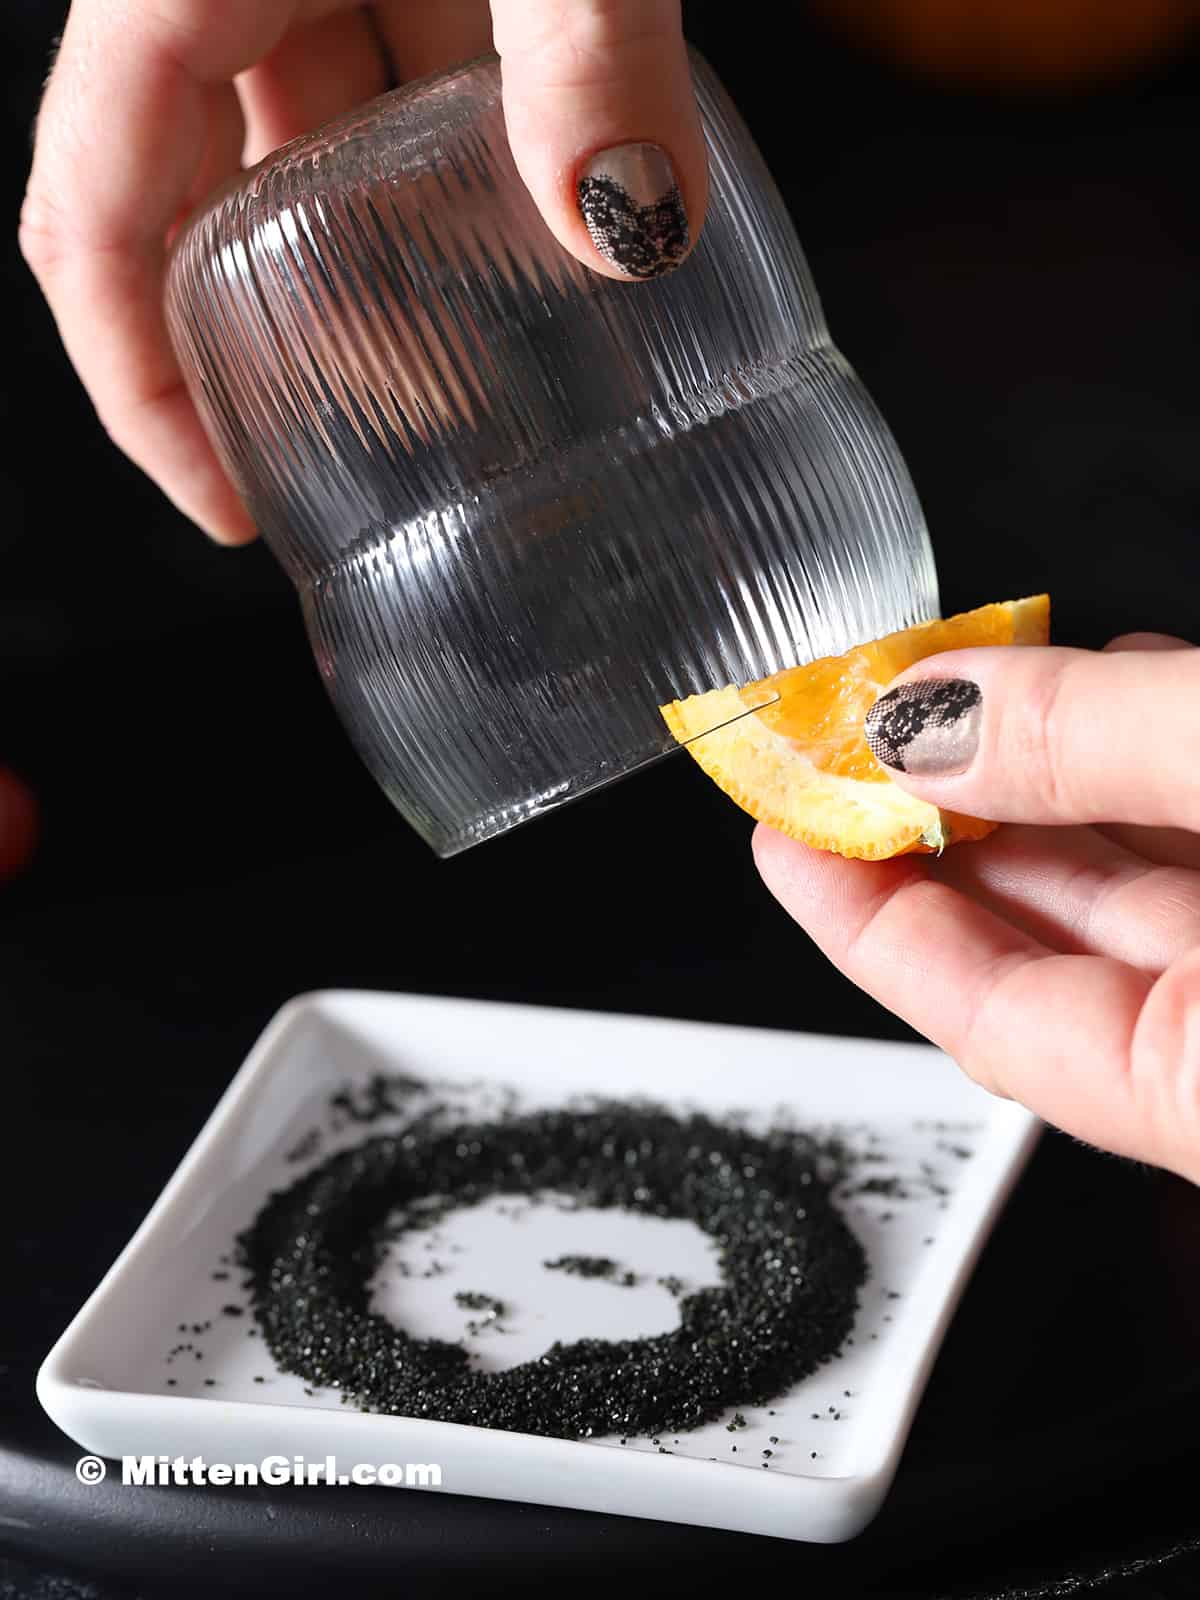 A hand holding an orange slice on the rim of a glass.